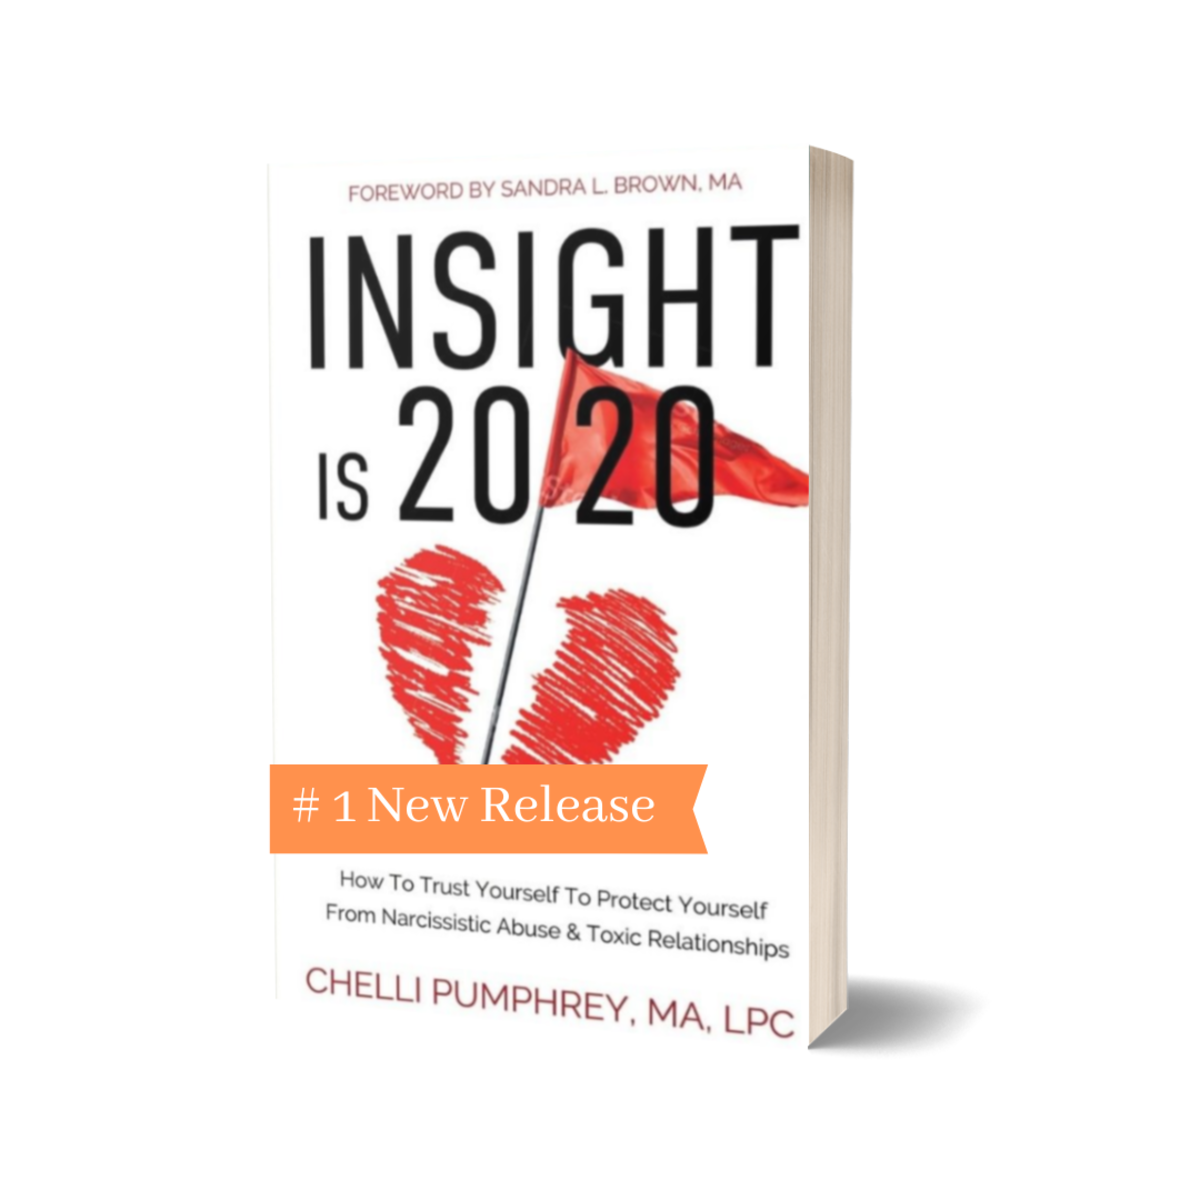 Review of Nonfiction Relationship Book: 'Insight 20/20'